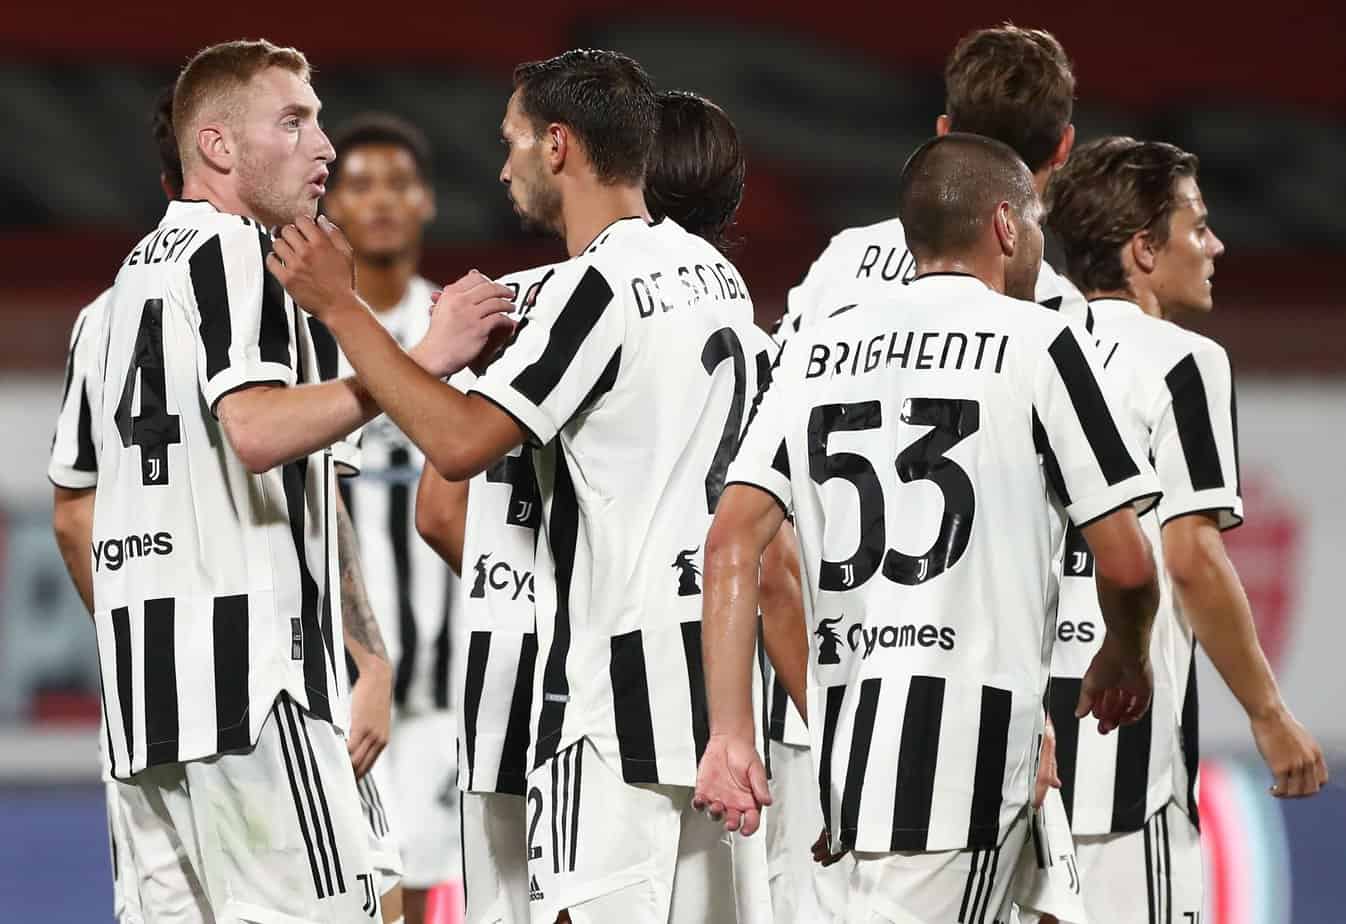 Monza vs. Juventus – Betting Odds and Free Pick